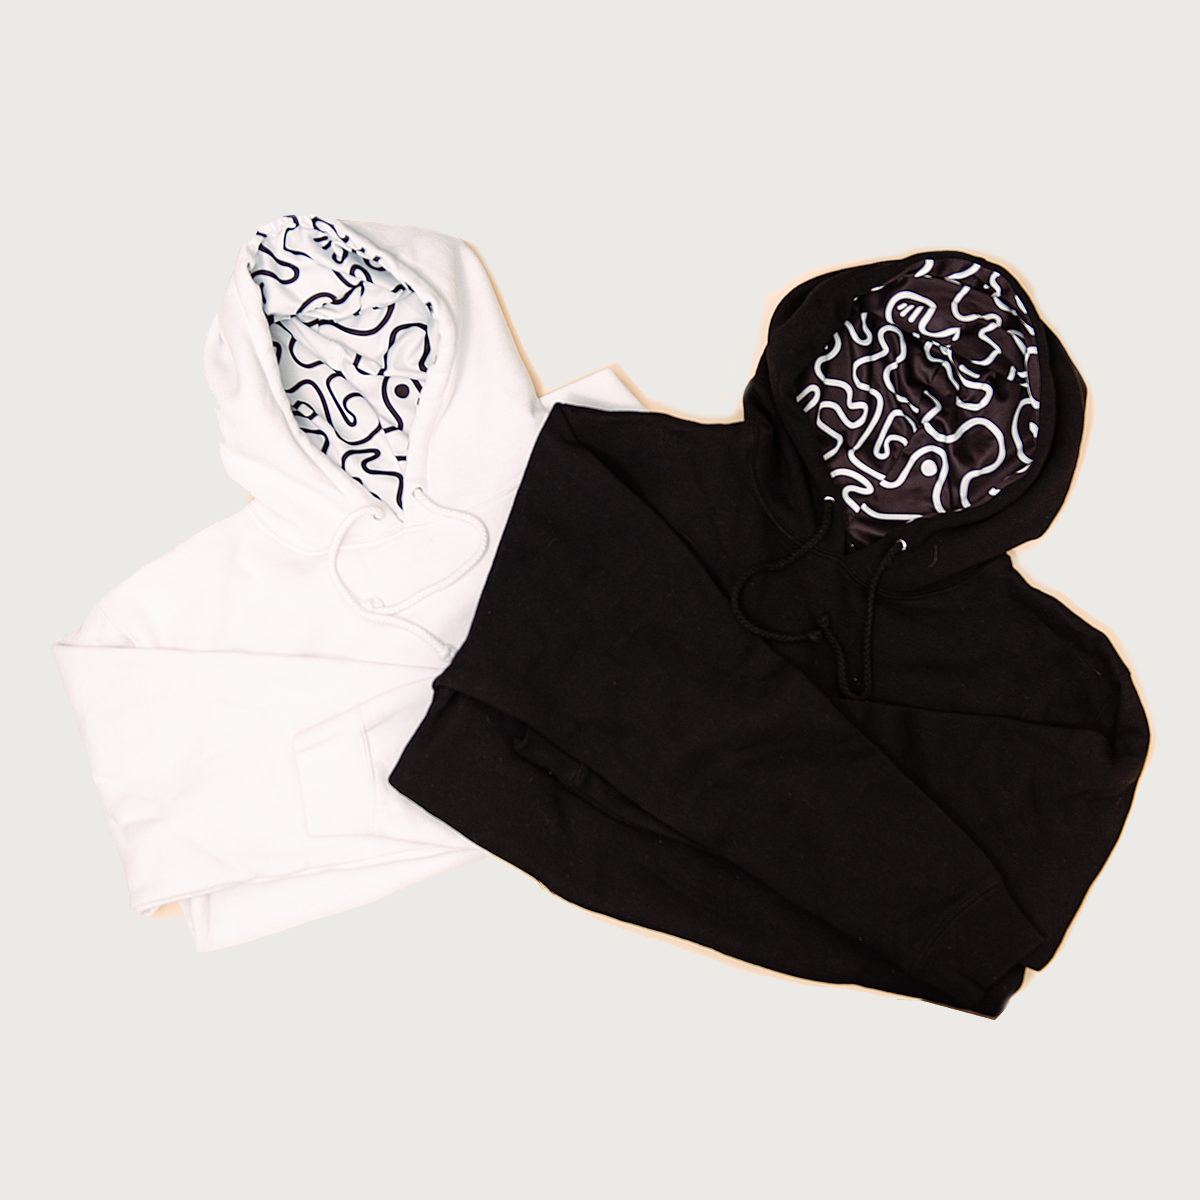 Cozy lined hoodies folded in both black and white with a monochromatic raised MAD TASTY logo and hoodie lined with our signature squiggle line art.